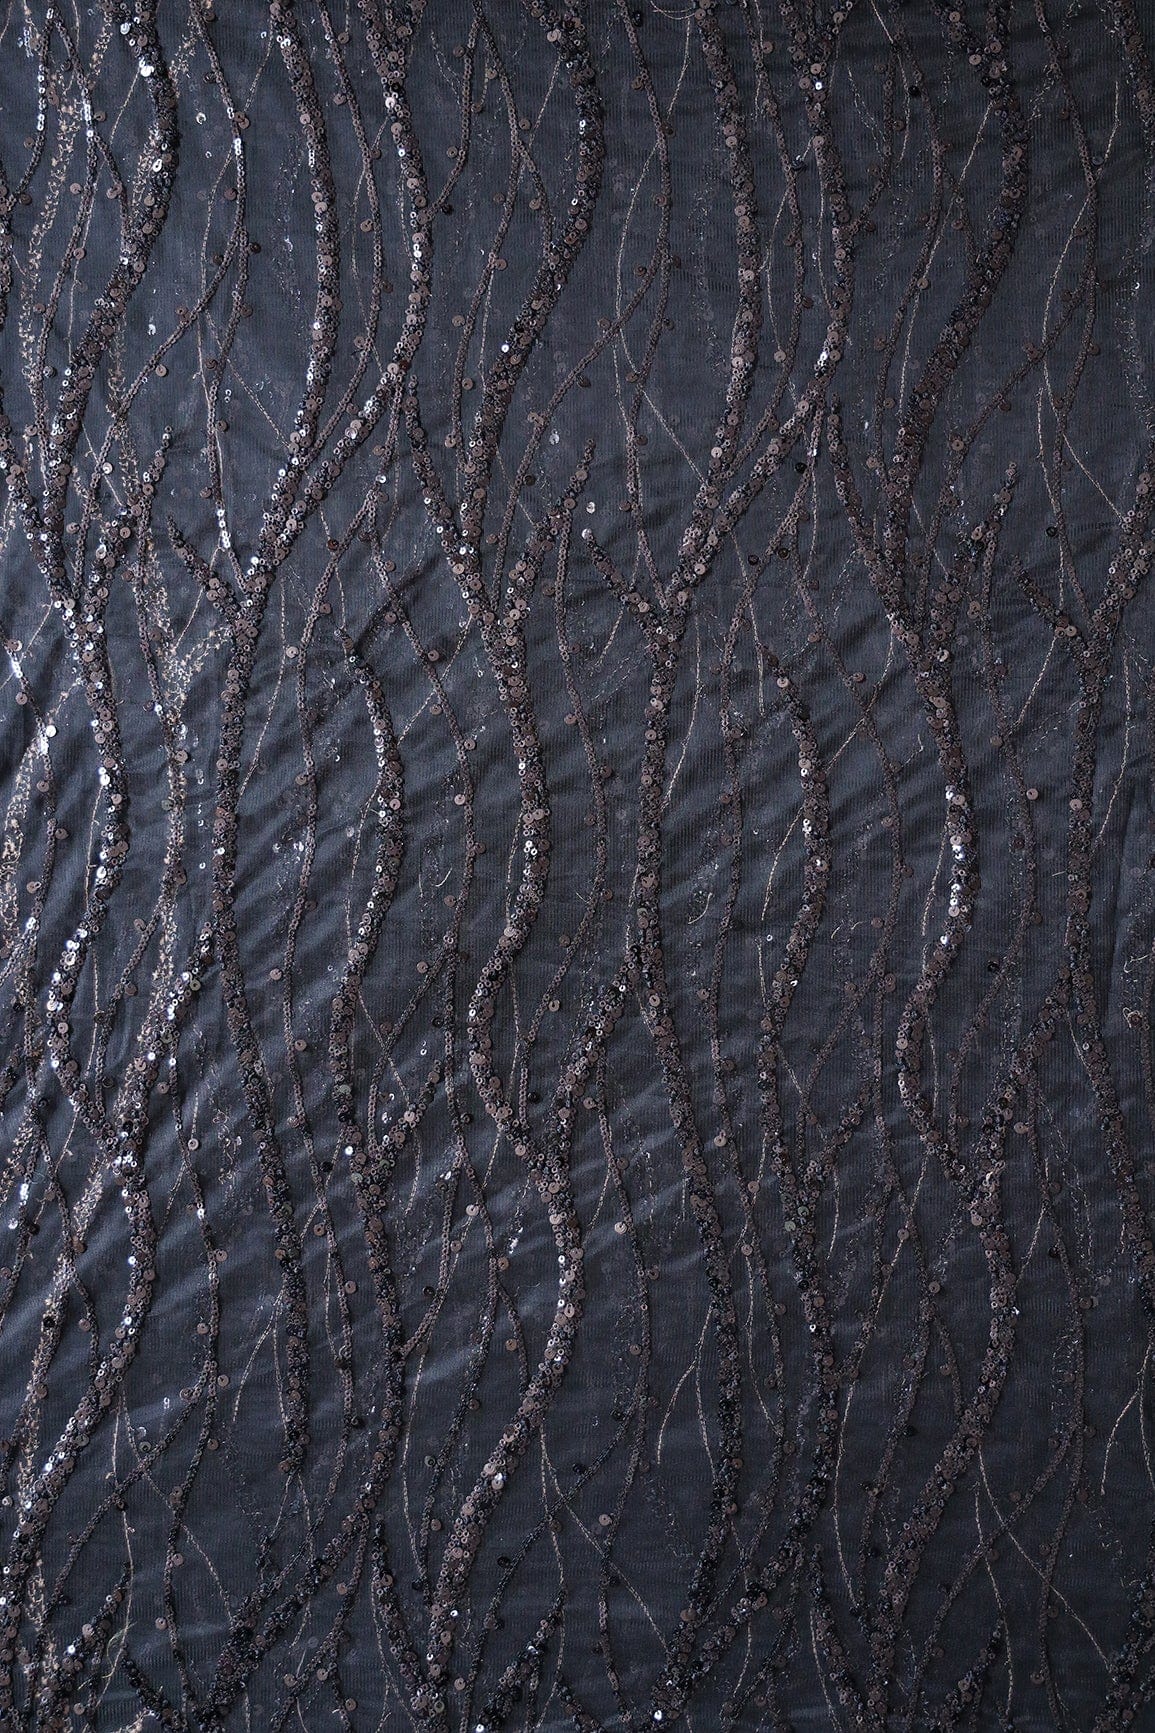 doeraa Embroidery Fabrics Beautiful Sequins With Black Thread Wavy Embroidery Work On Black Soft Net Fabric